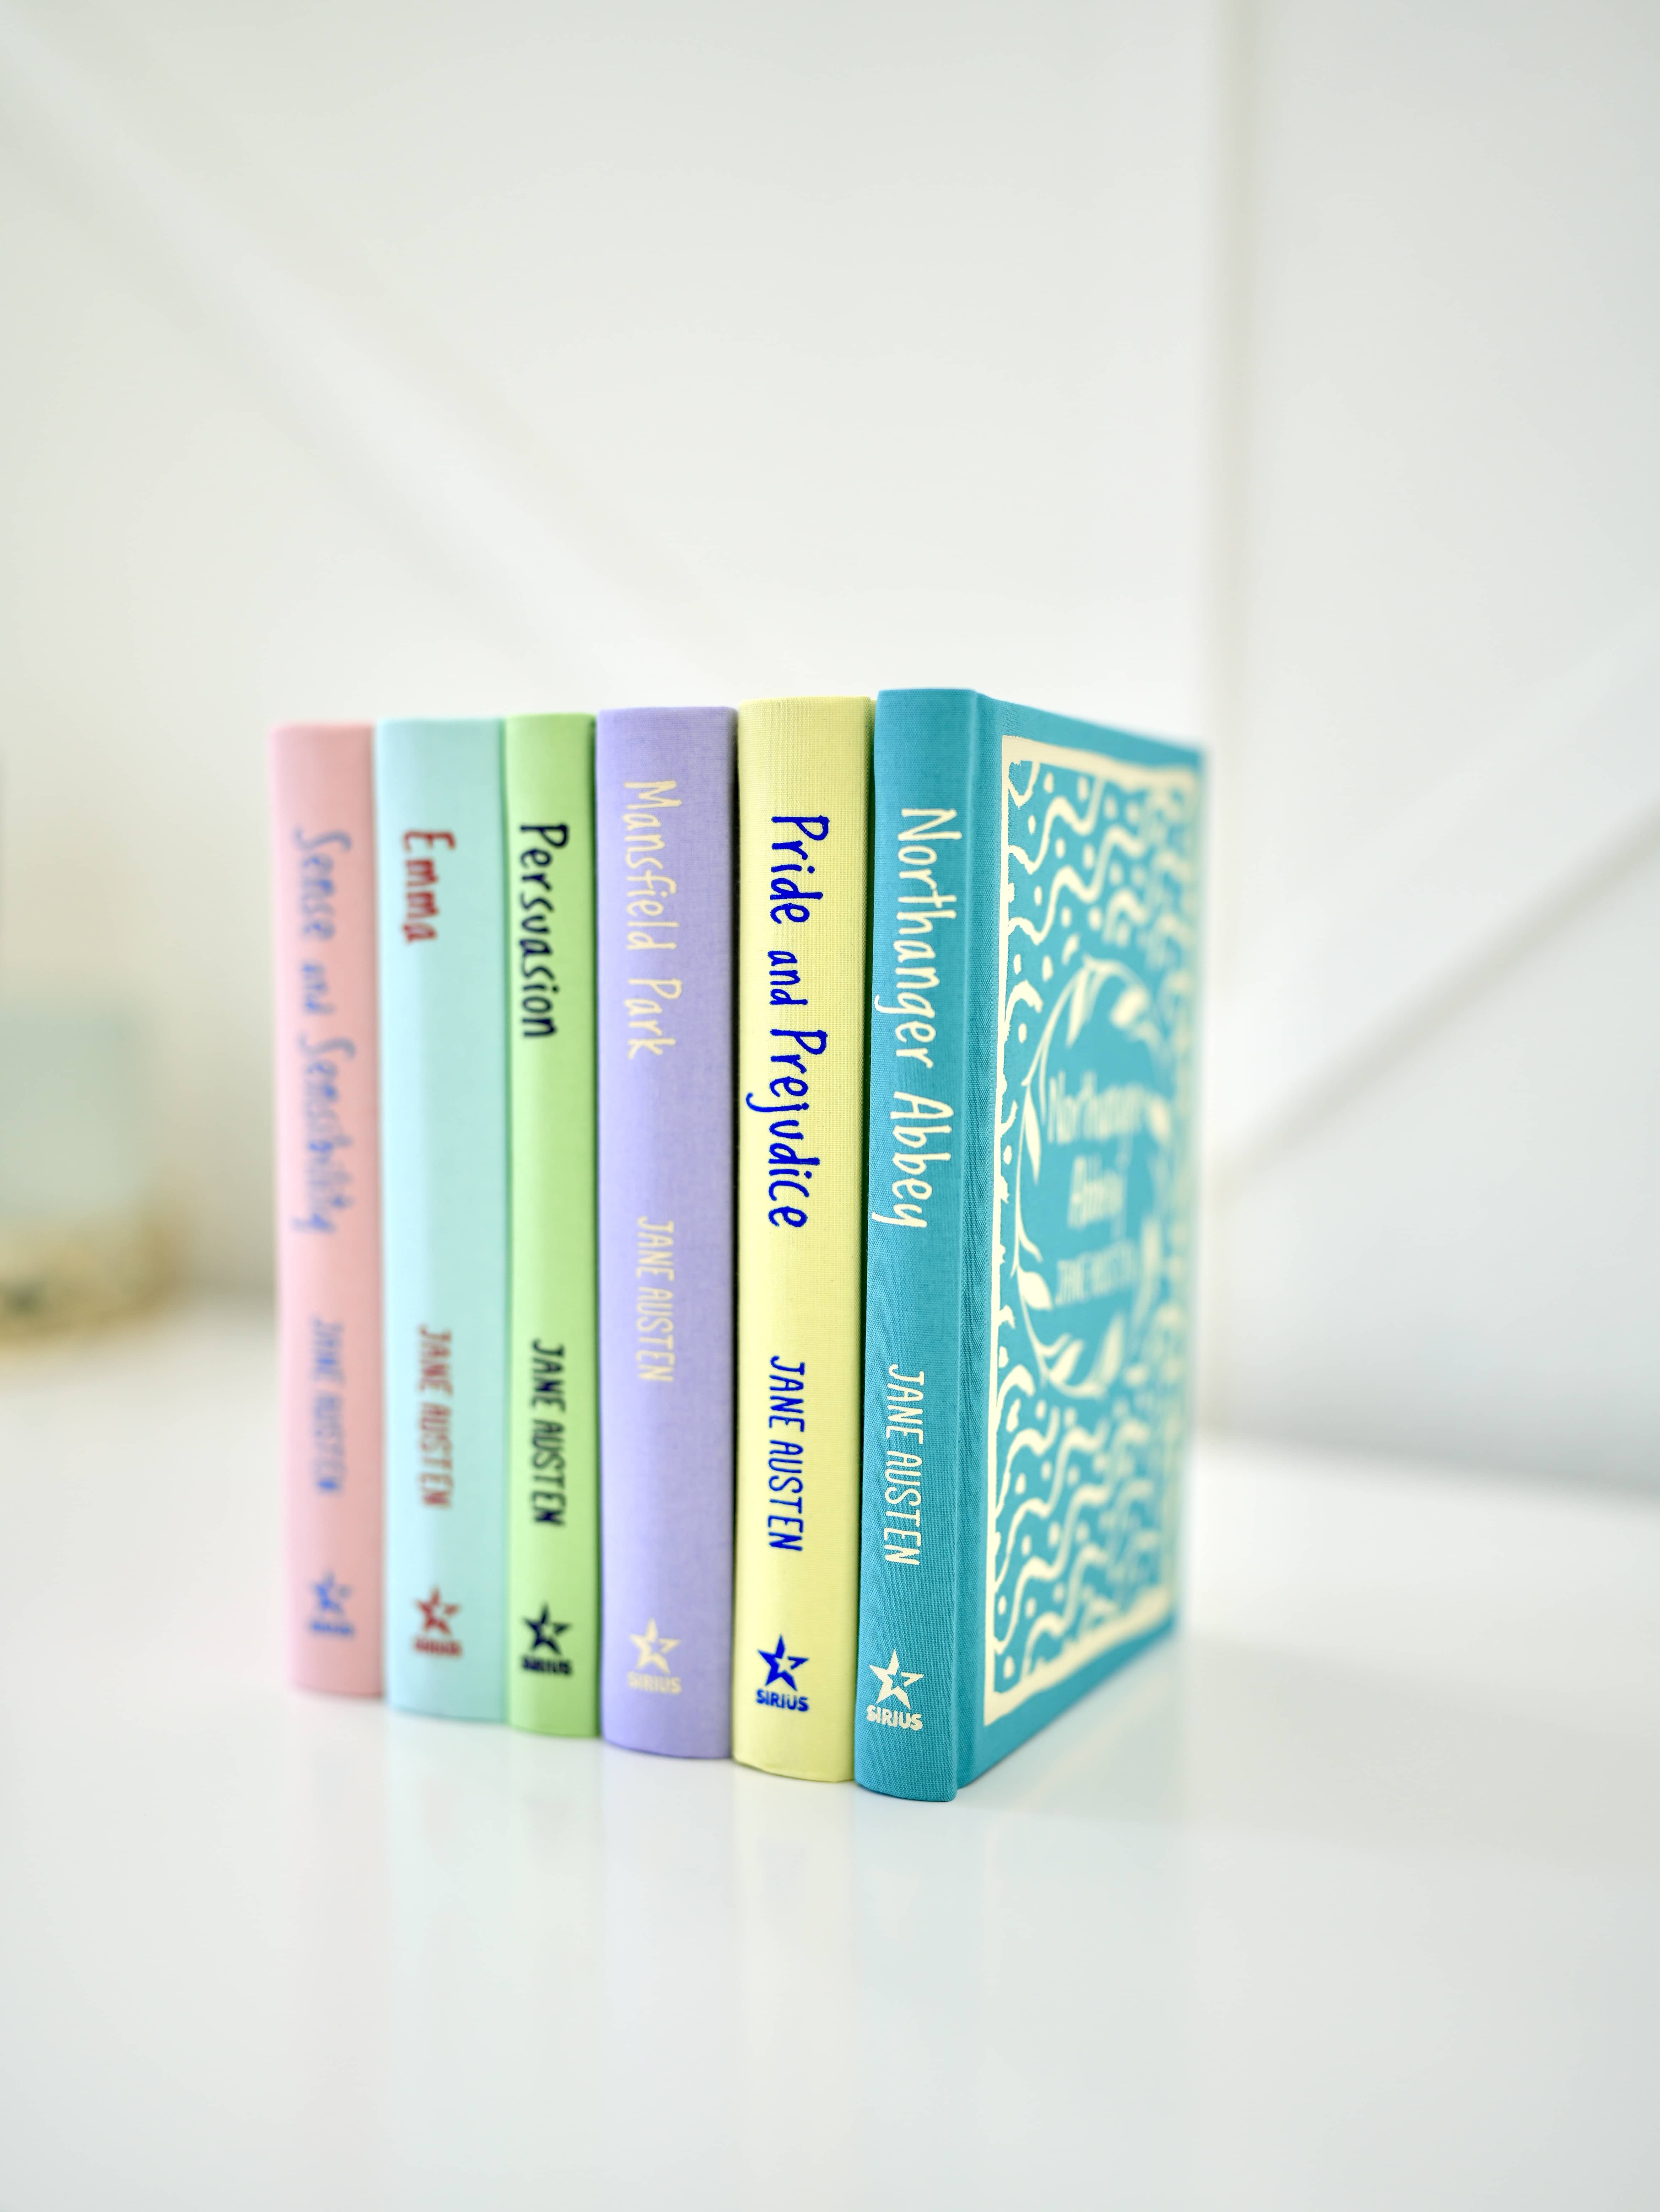 Jane Austen hardcover books standing on white table in front of white wall. Multi-colored books.